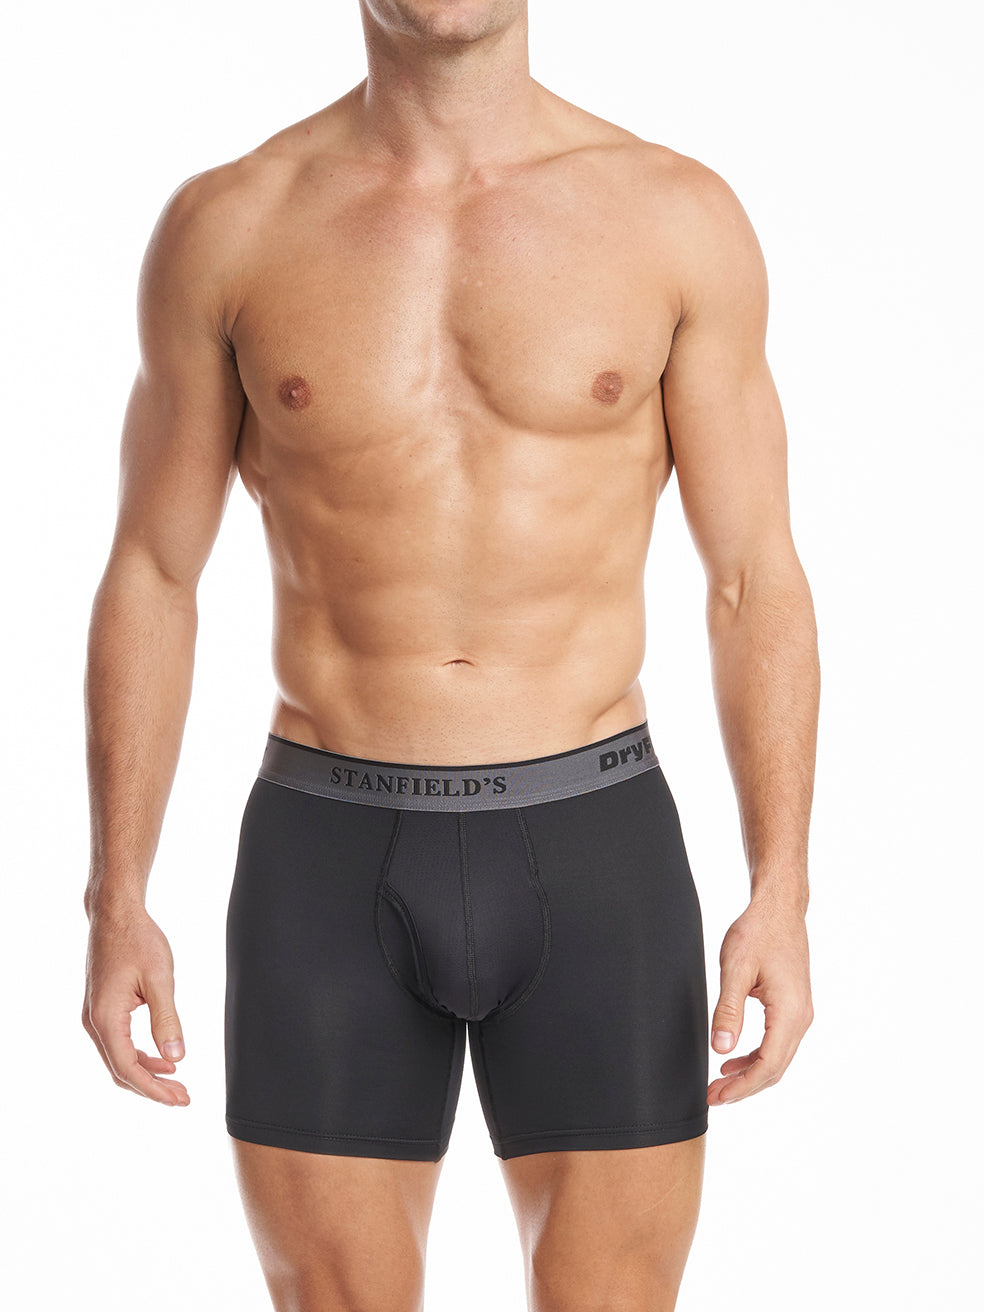 Find Wholesale Uomo Boxers Supplies To Order Online 